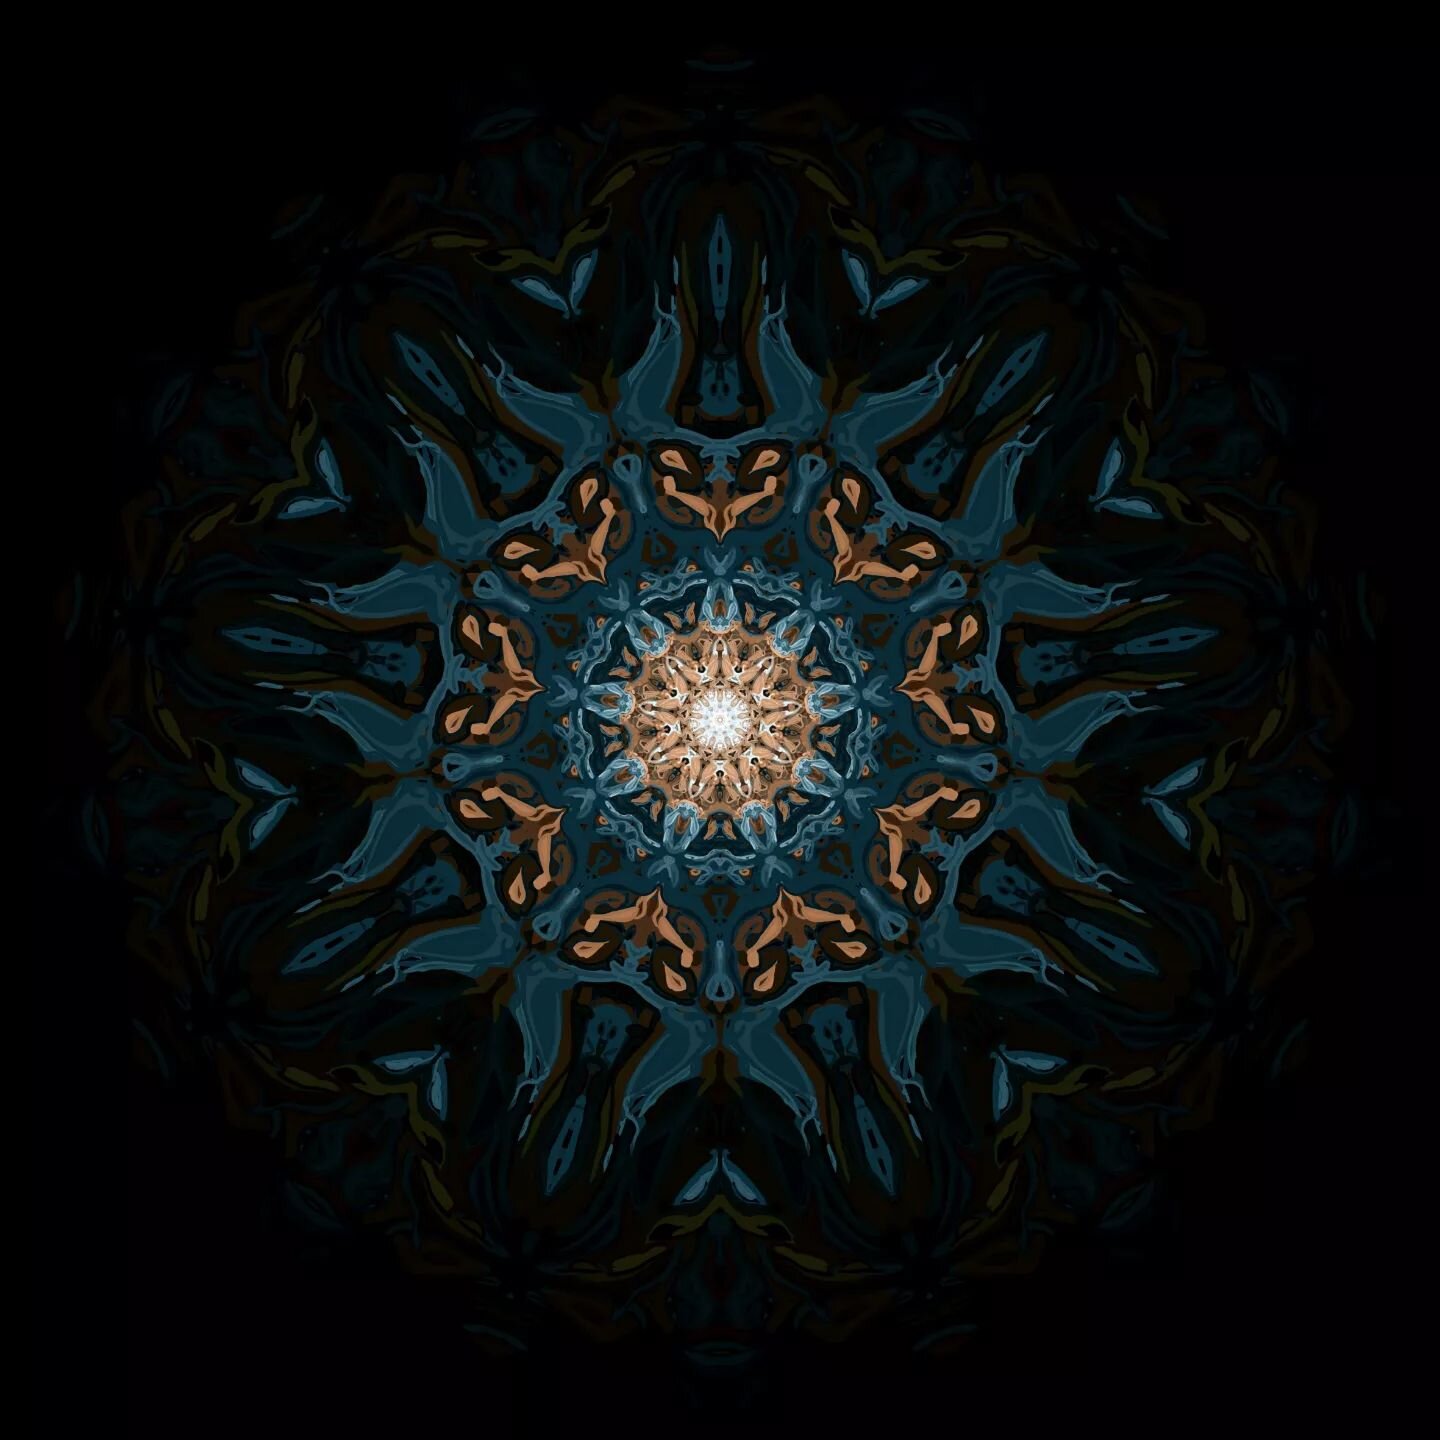 ☀️❄️🕸️
There's always a light at the end of the tunnel. 
.
Playing around on Photoshop, and doing a 9 fold mandala fading from black to white. Swipe to see it inverted
.
.
.
#mandala #mandalapainting #mandalaart #mandaladrawing #mandalaartist #light